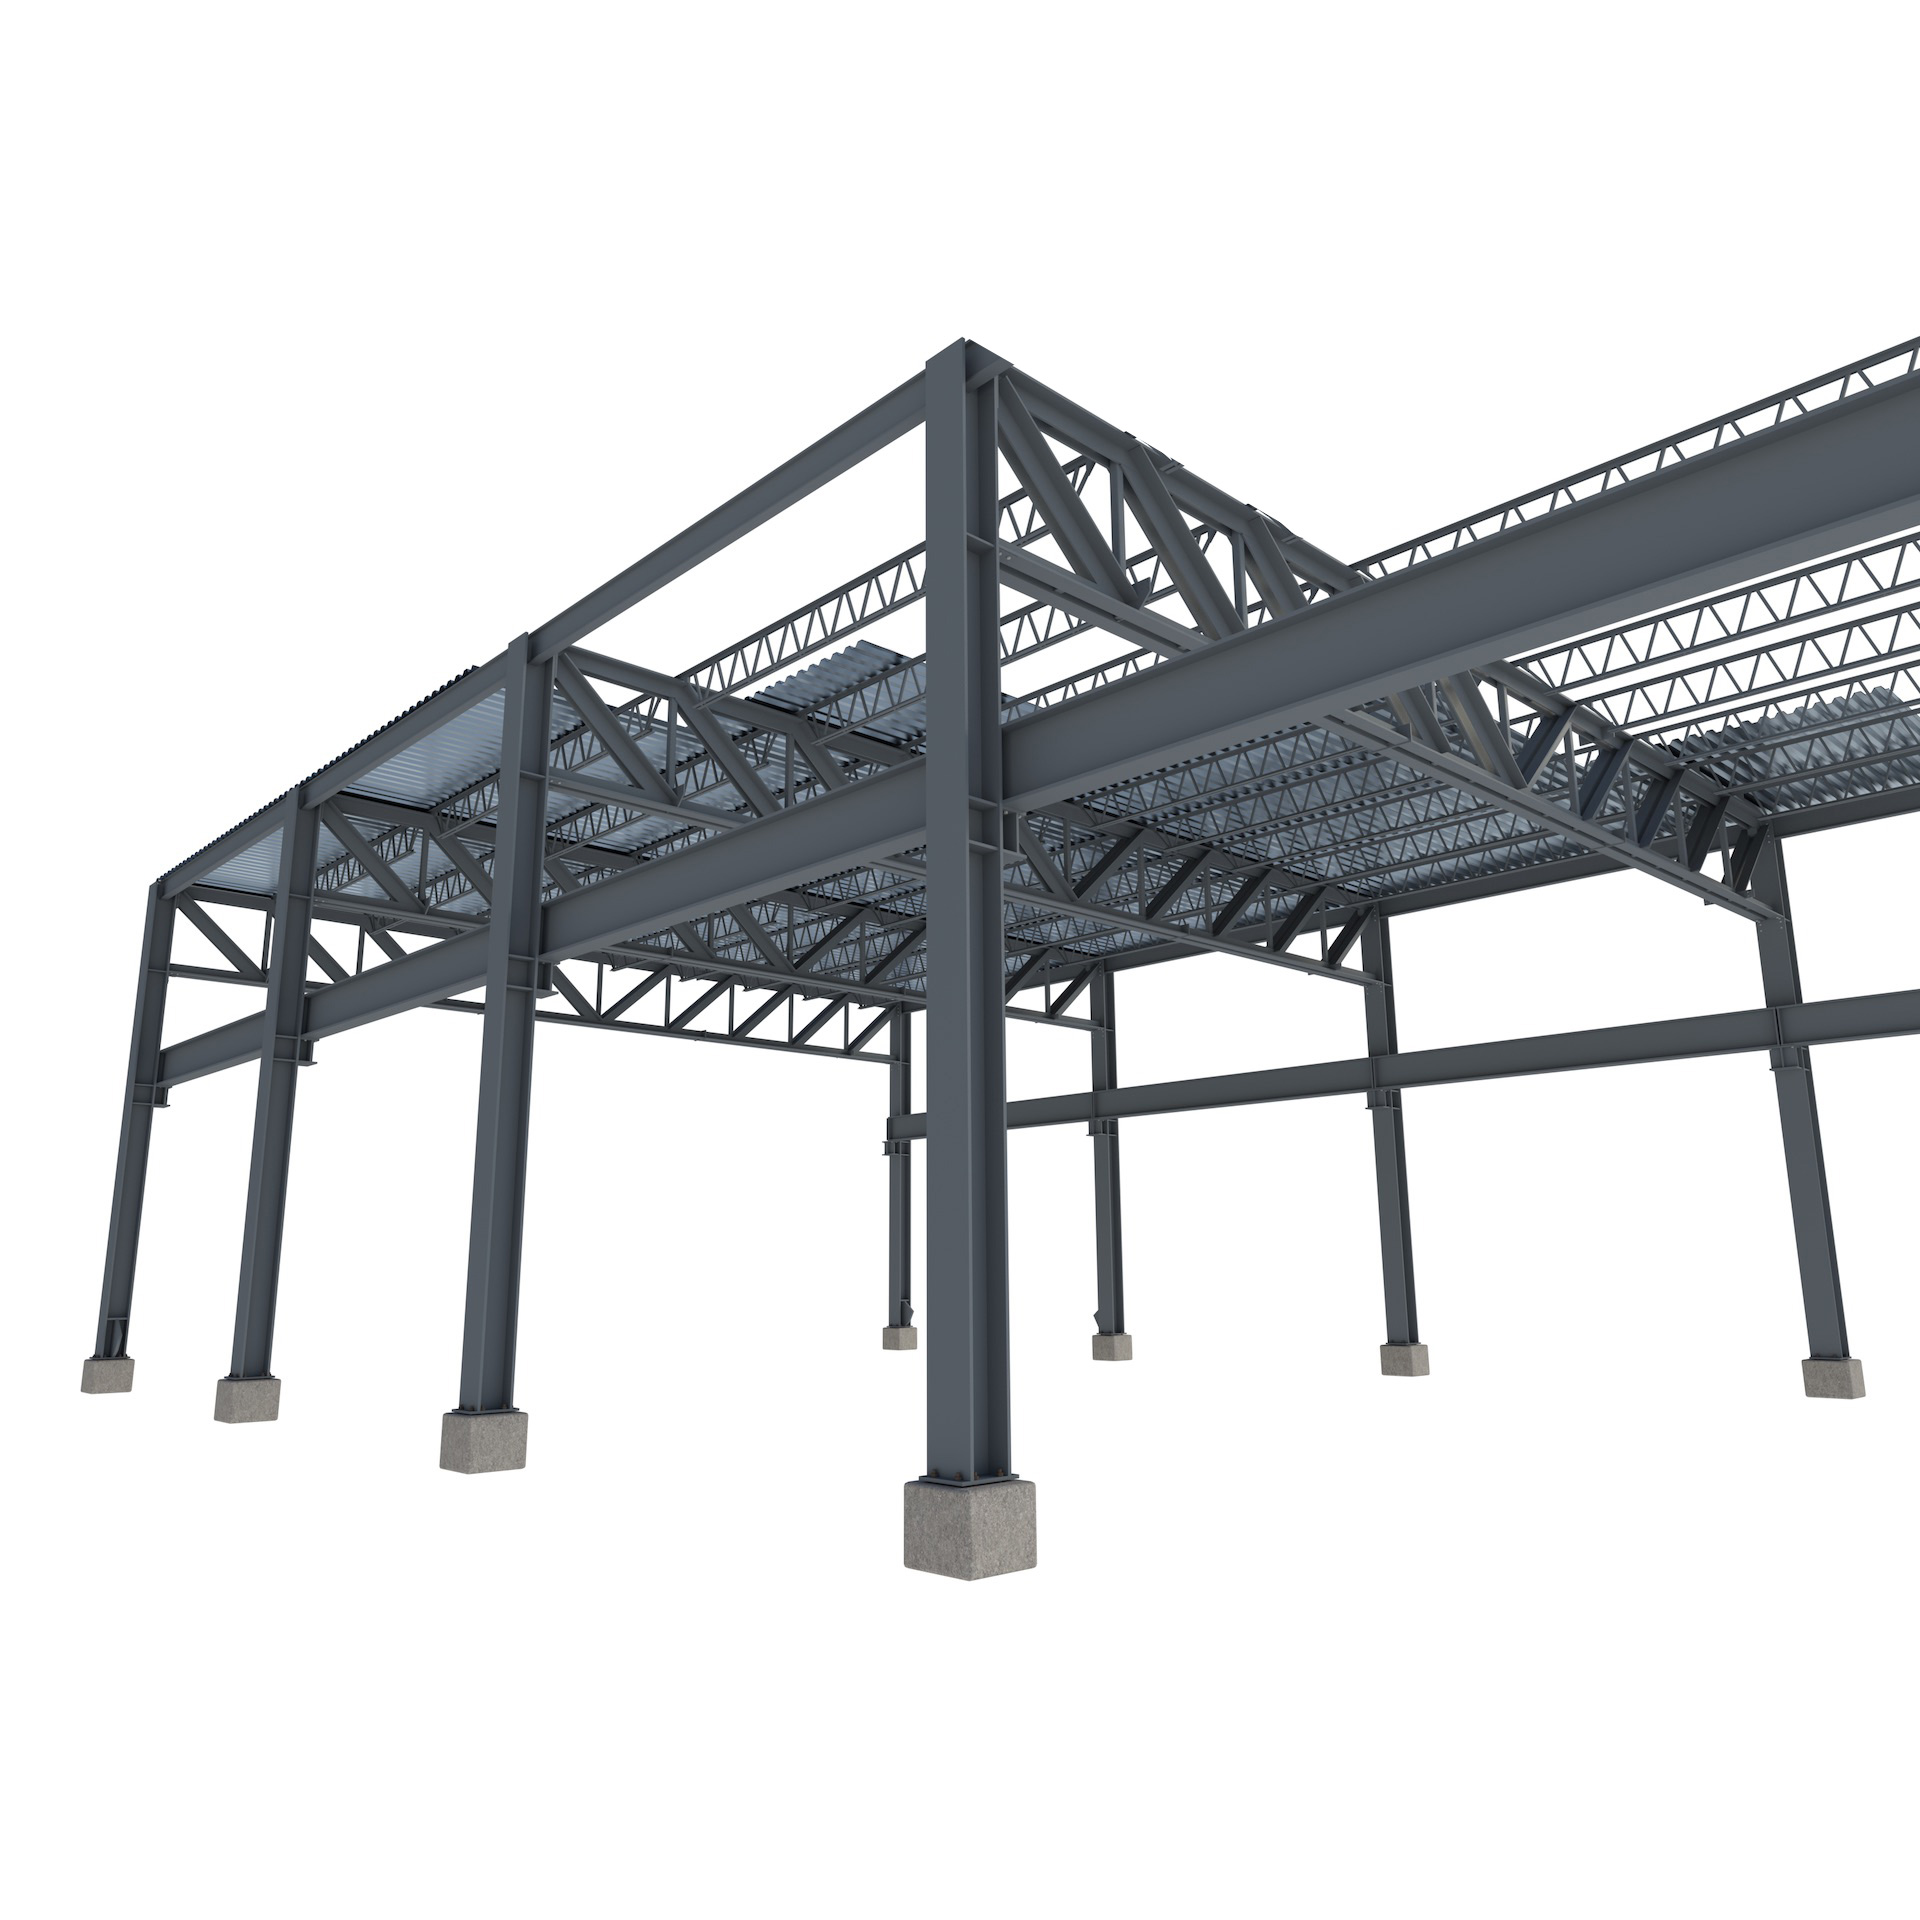 Structural steels